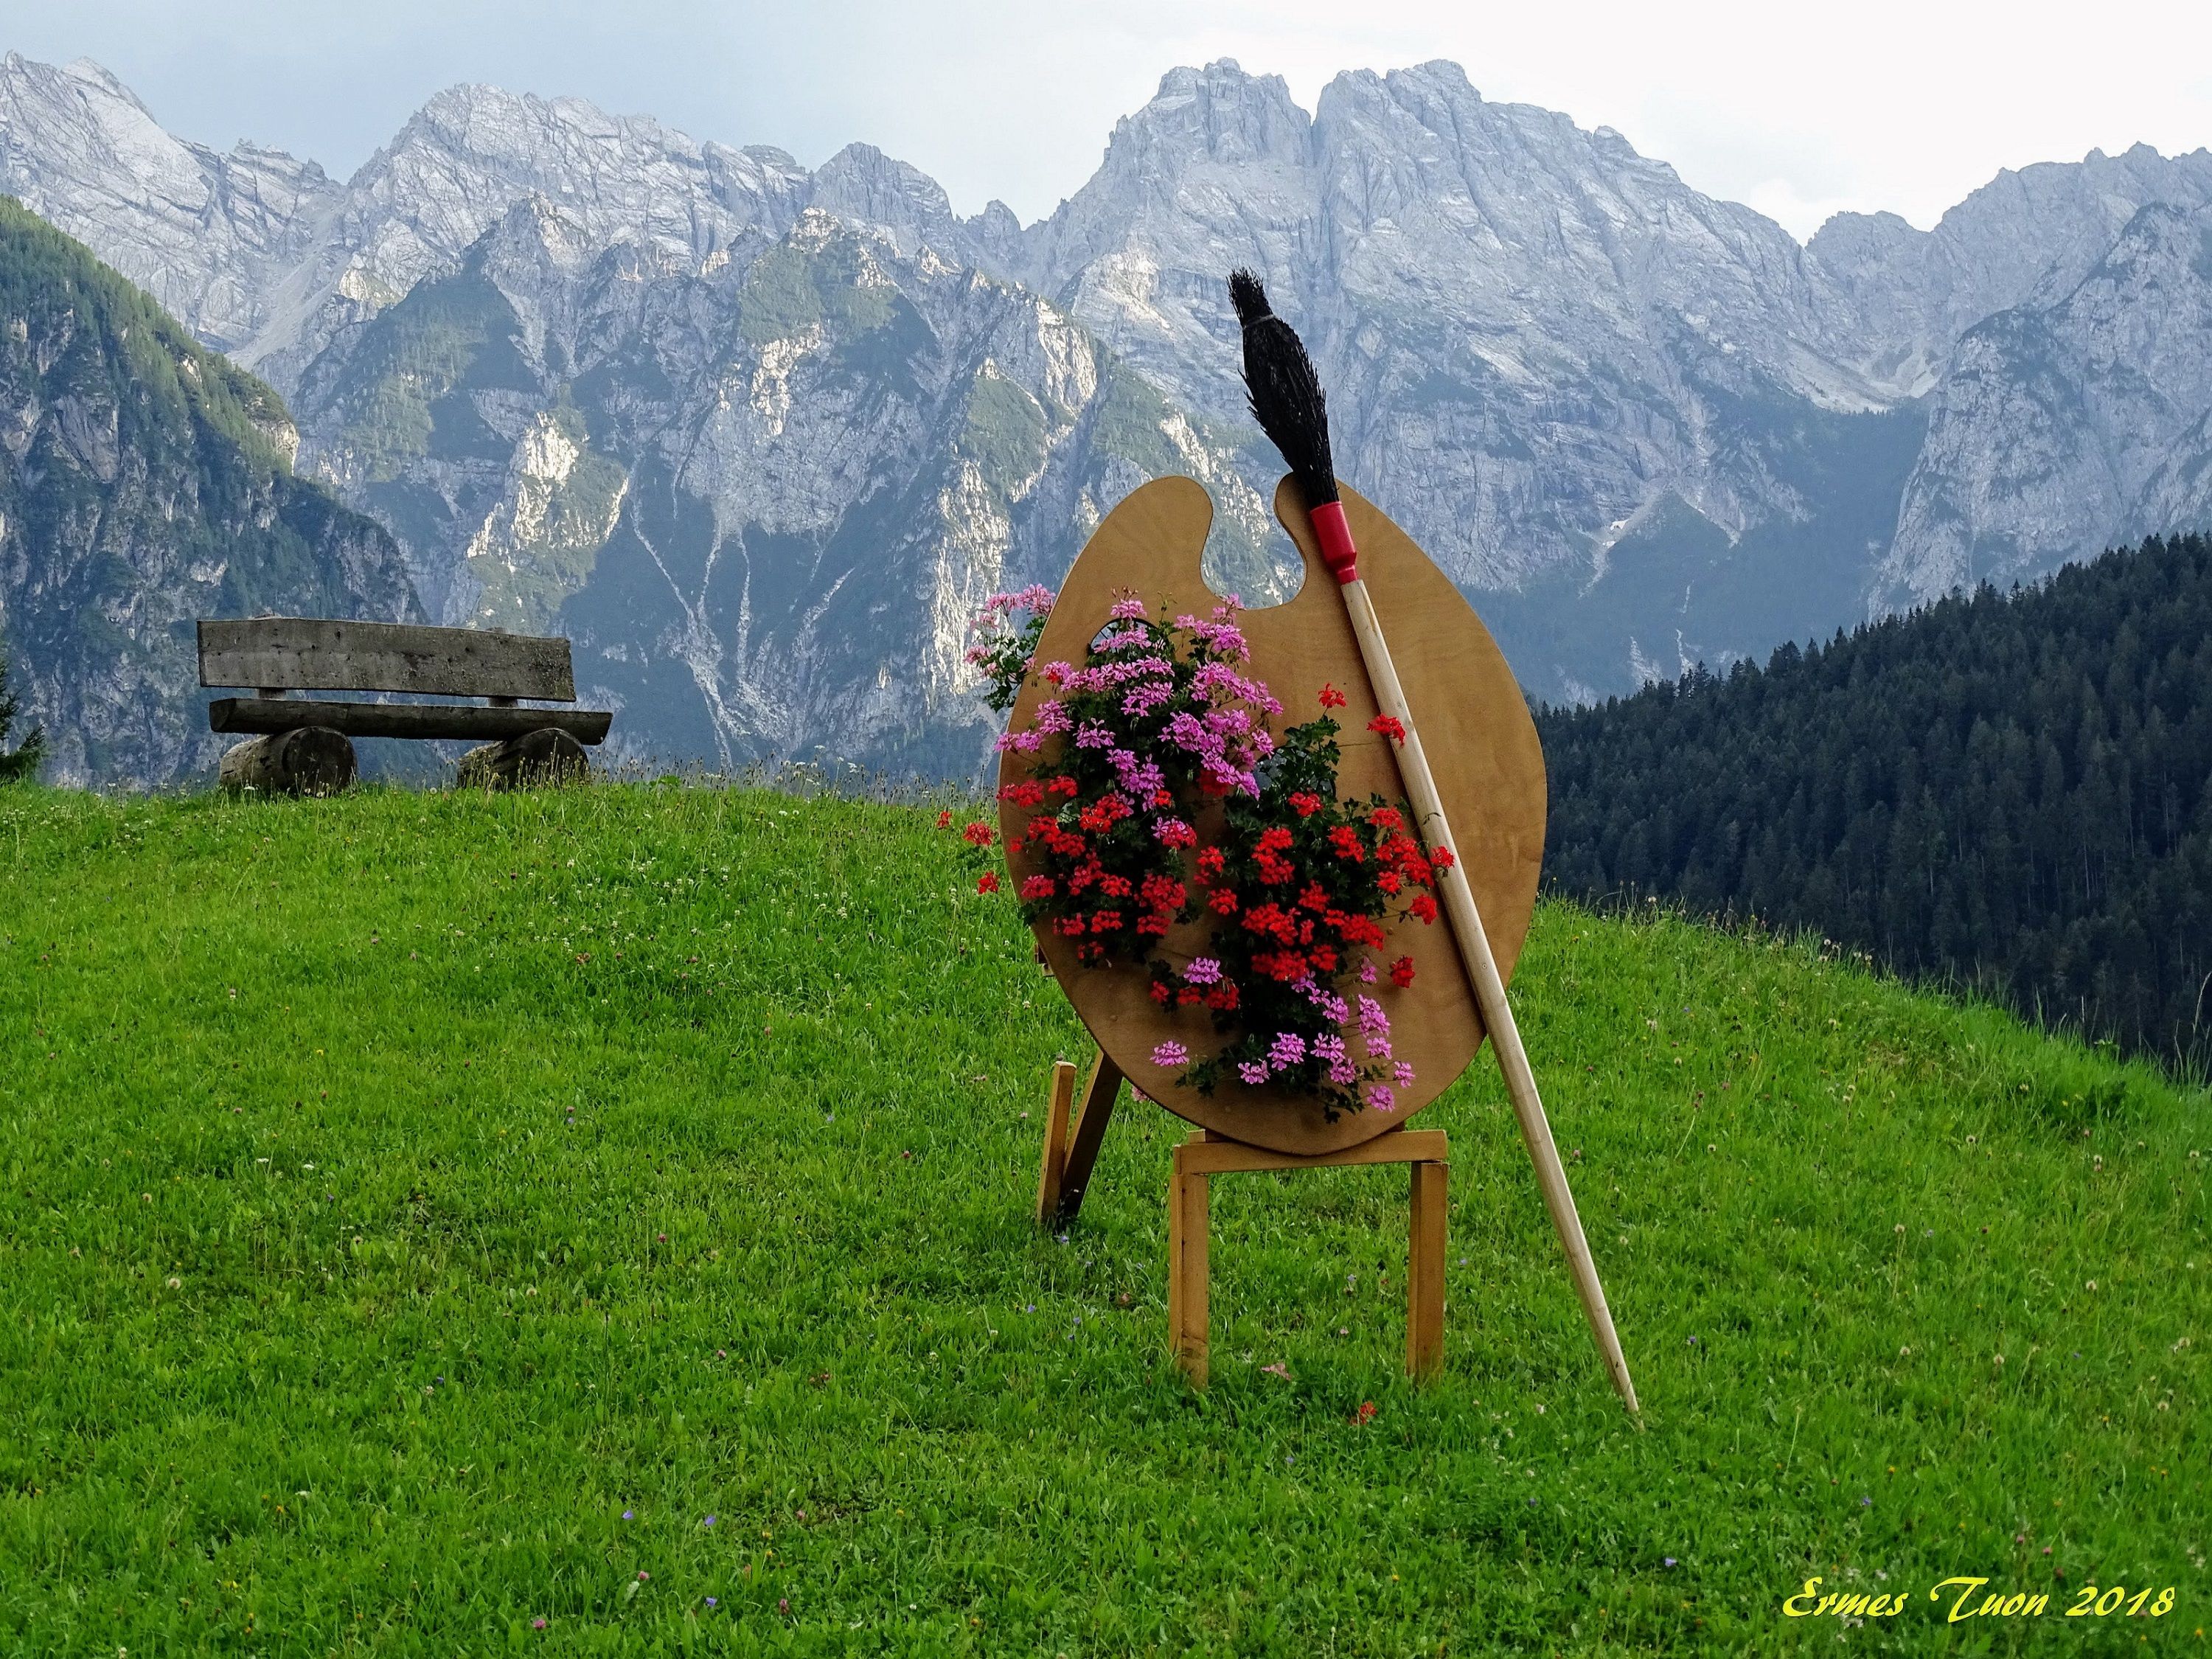 Caption: a palette of geraniums for painting the beauty of the Alps is welcoming you at the entrance of the village